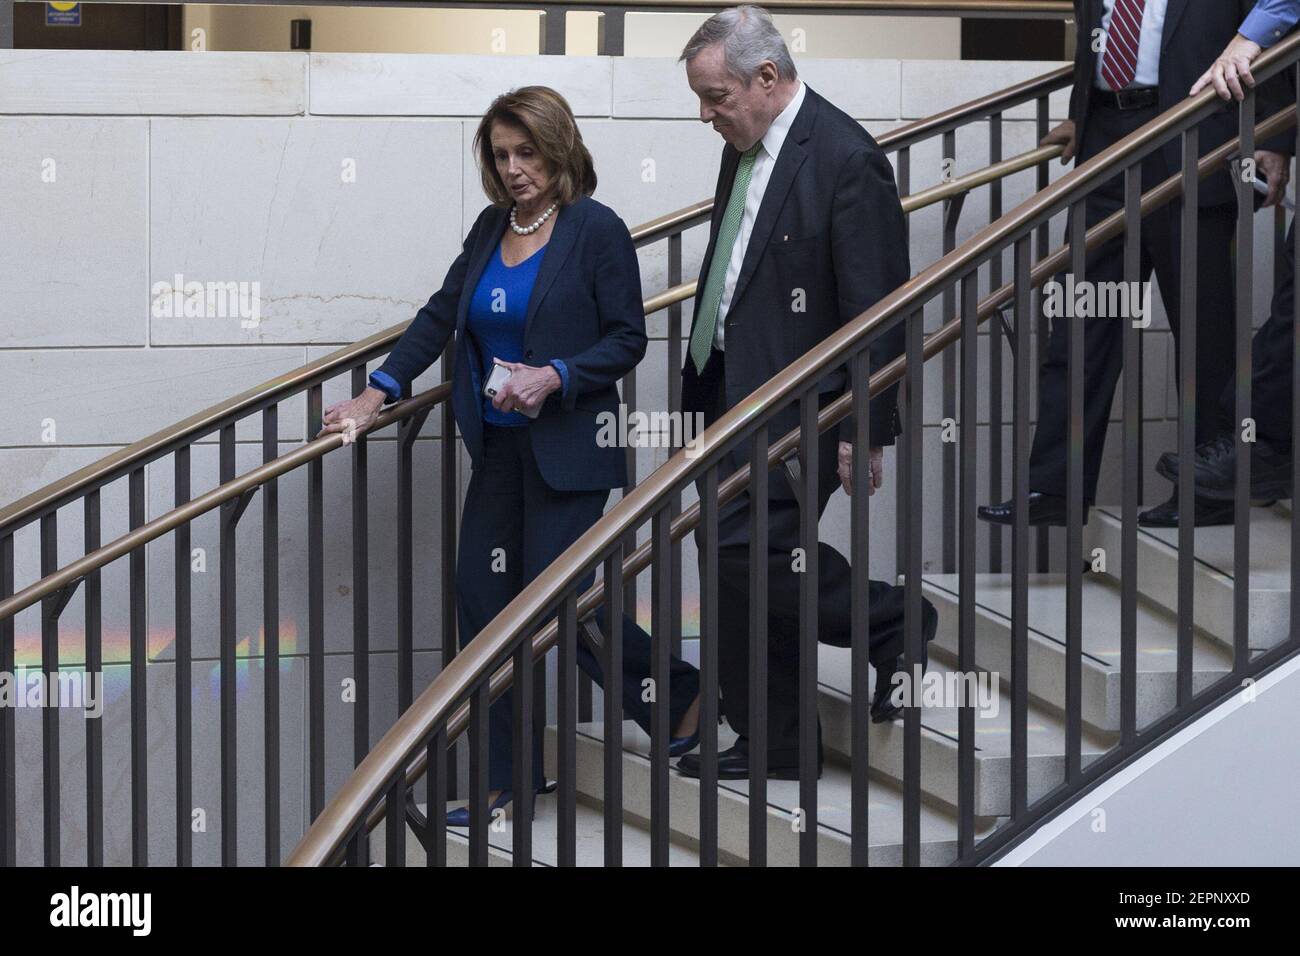 United States House Minority Leader Nancy Pelosi (Democrat of California) and US Senator Dick Durbin (Democrat of Illinois) walk to a Democratic Caucus meeting at the United States Capitol Building in Washington, D.C. on January 19th, 2018. (Photo by Alex Edelman/CNP/Sipa USA) Stock Photo